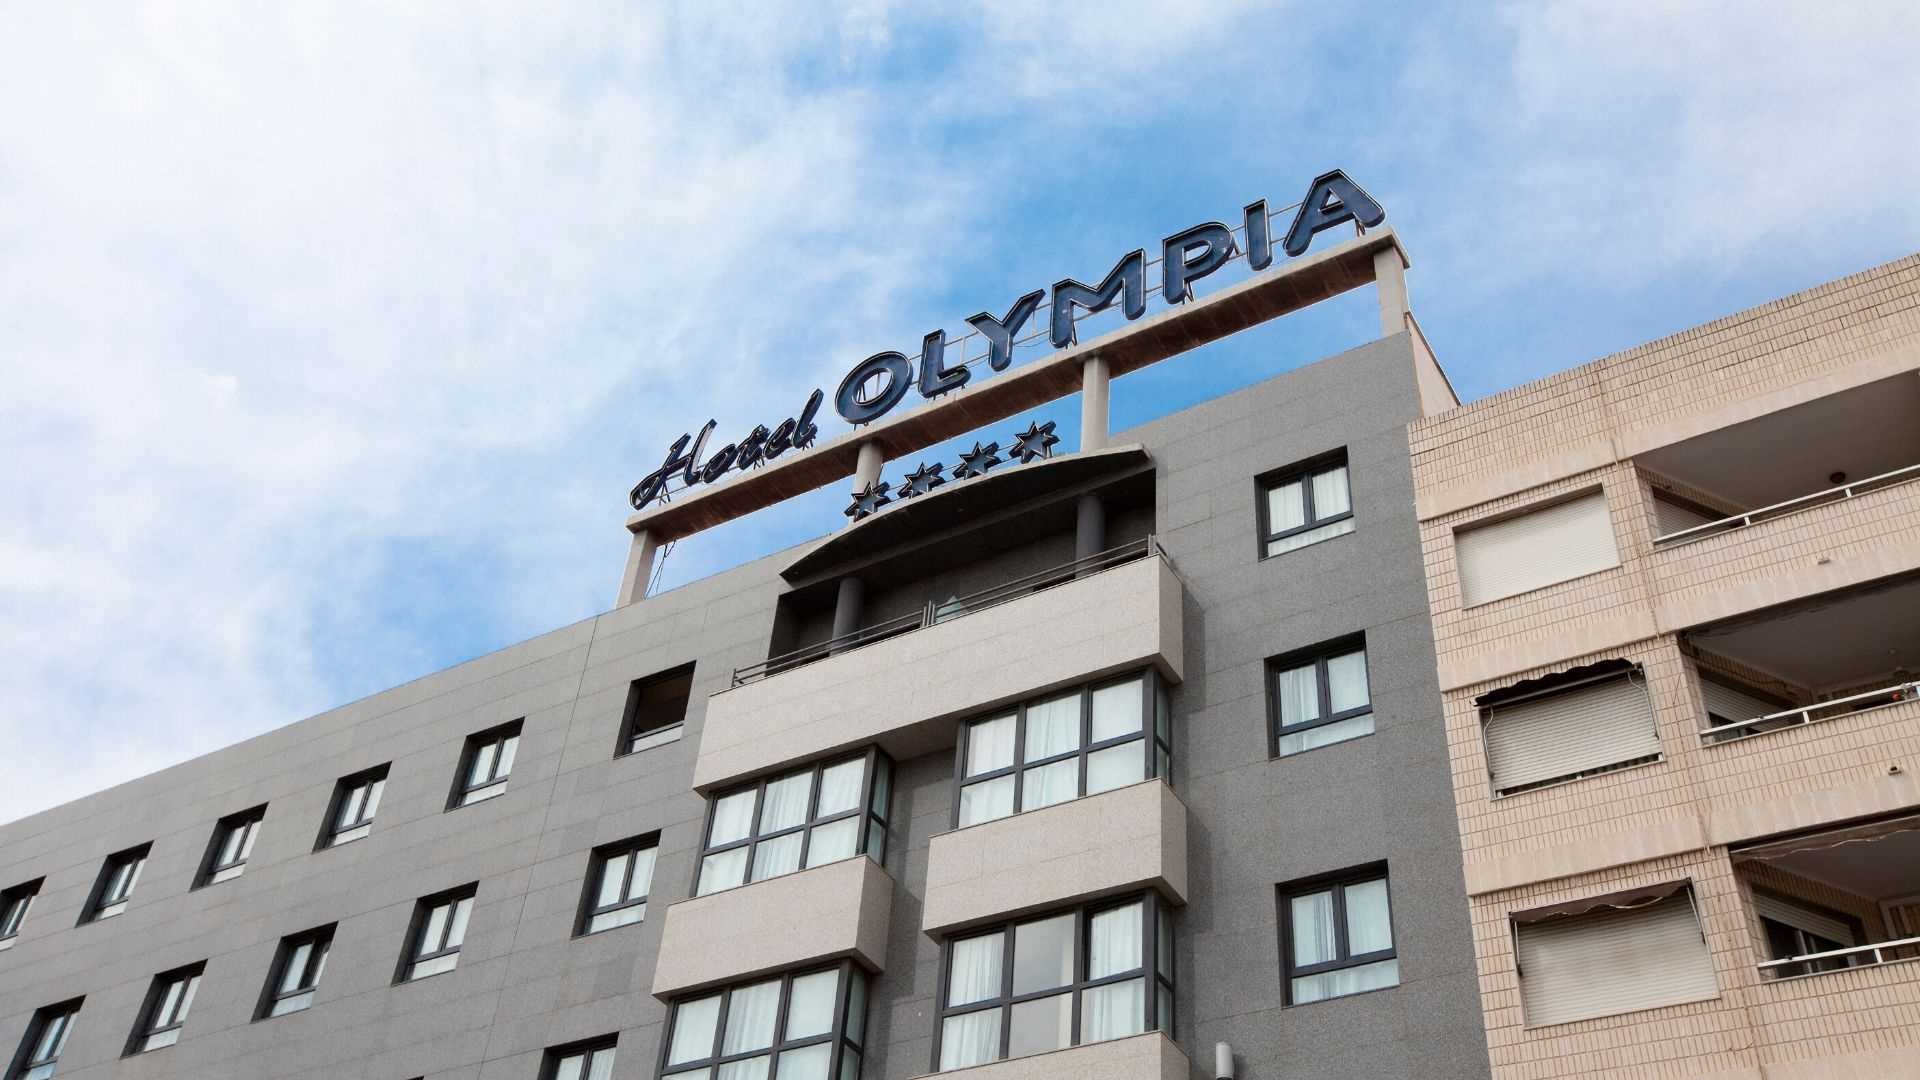 OLYMPIA HOTEL, EVENTS & SPA